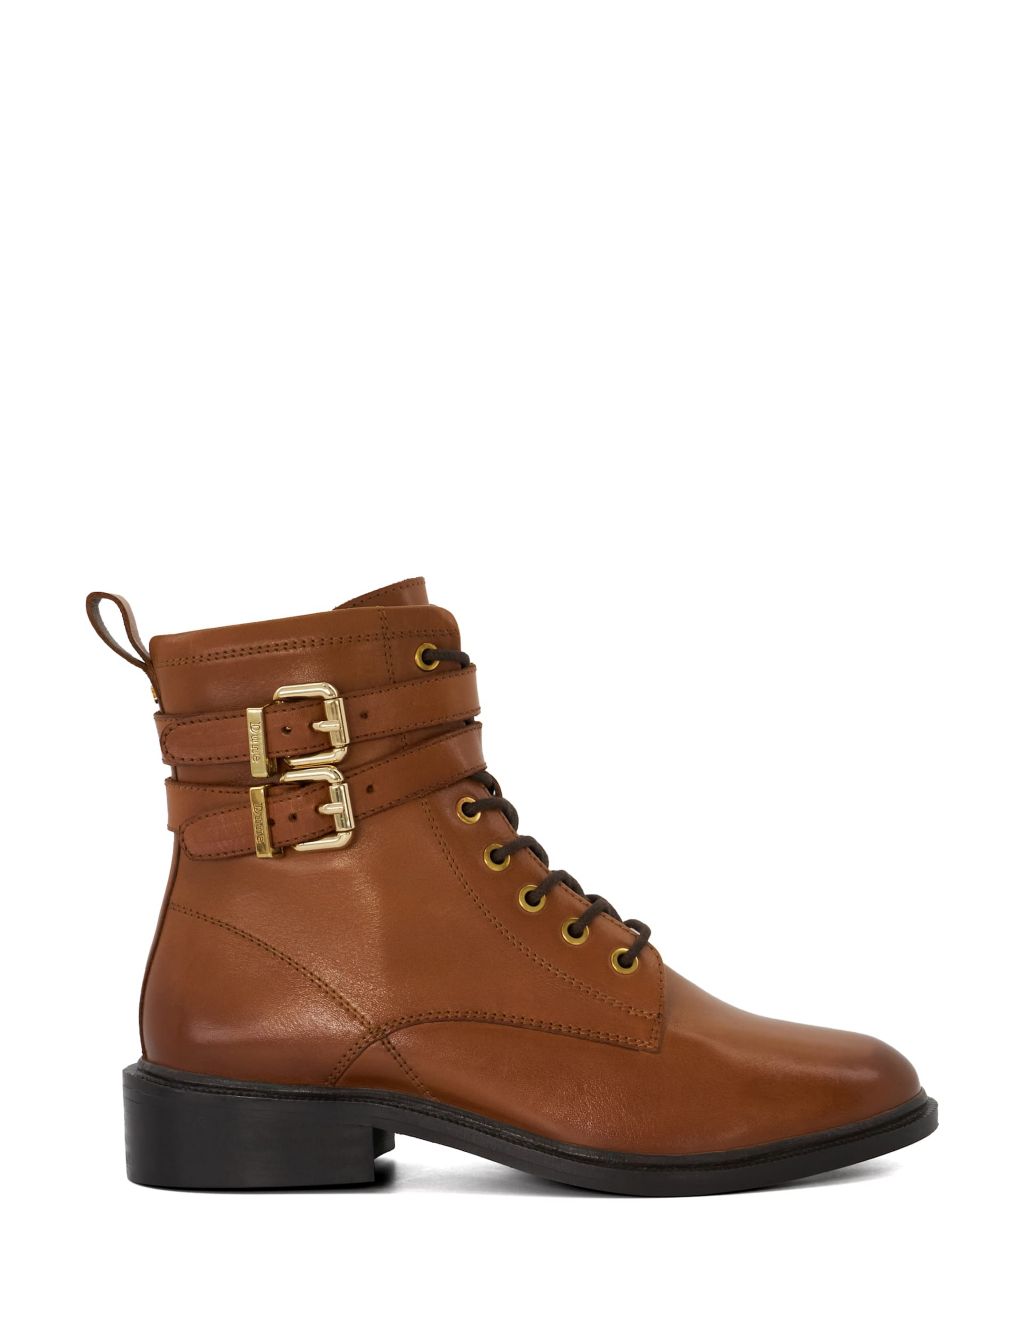 Leather Lace Up Buckle Flat Ankle Boots image 1